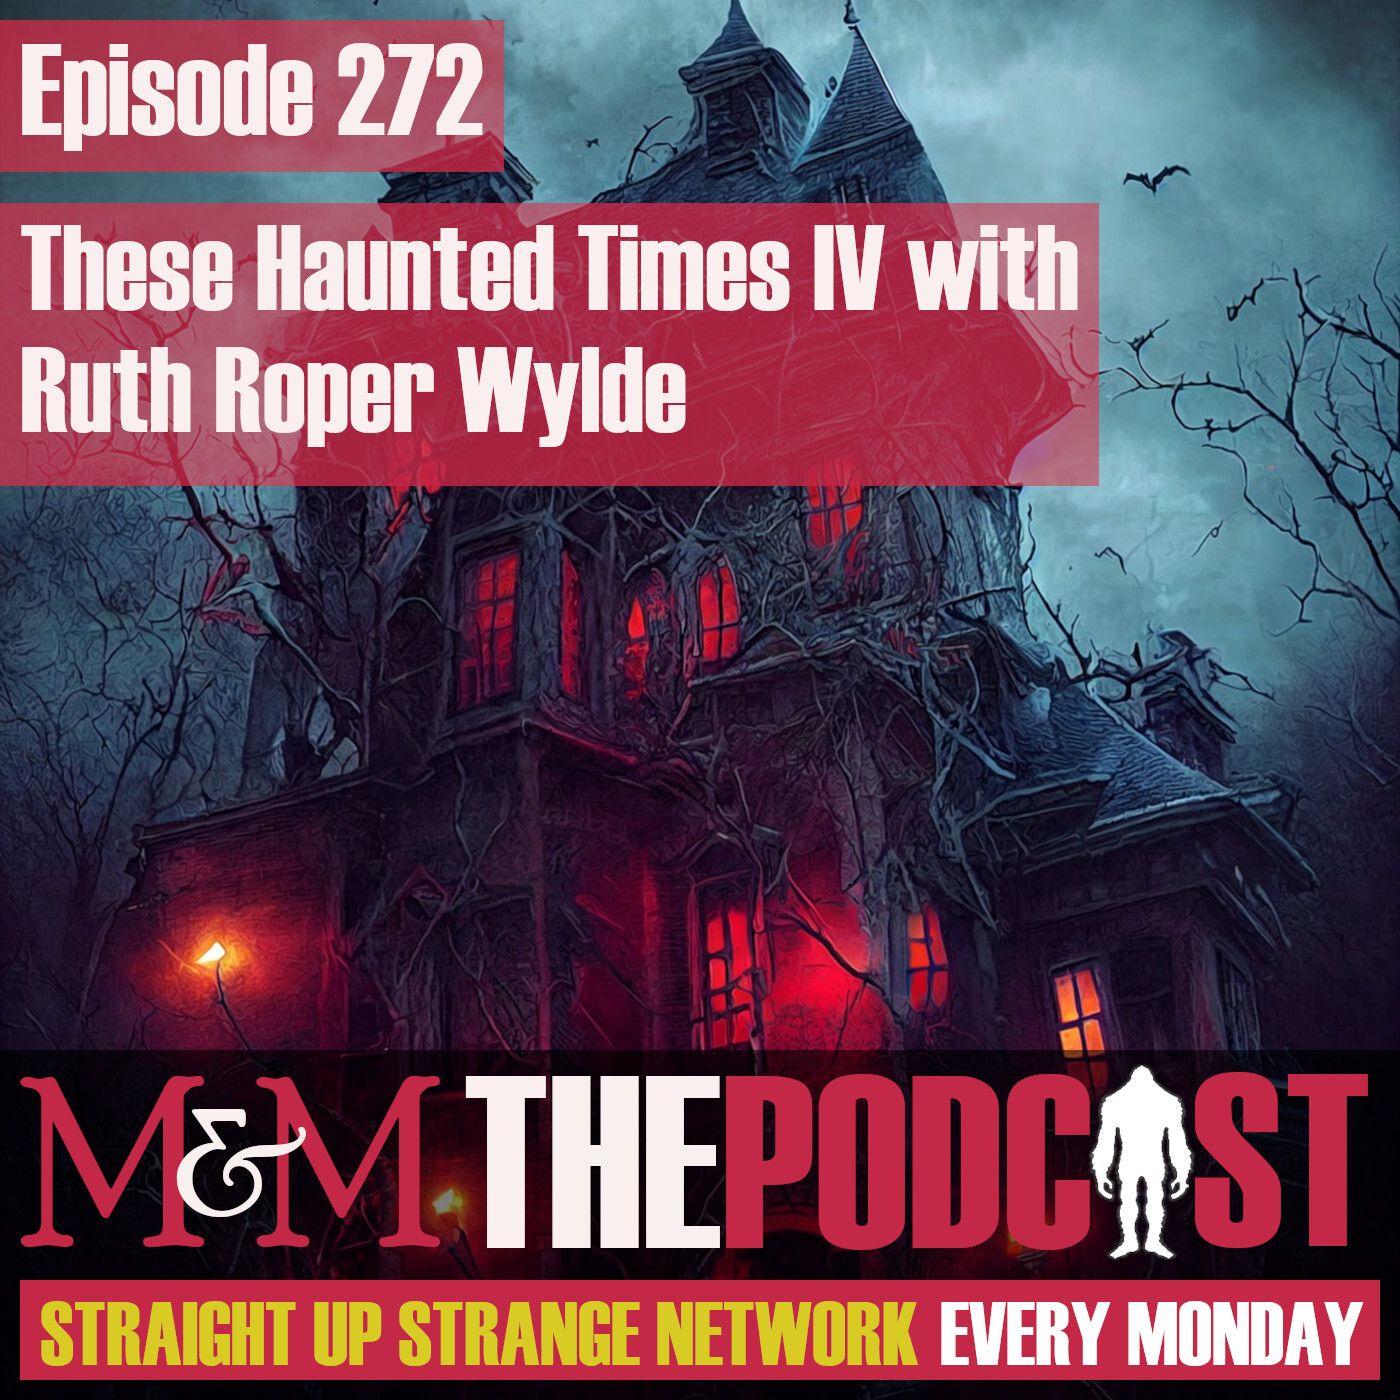 Mysteries and Monsters: Episode 272 These Haunted Times Volume Four with Ruth Roper Wylde